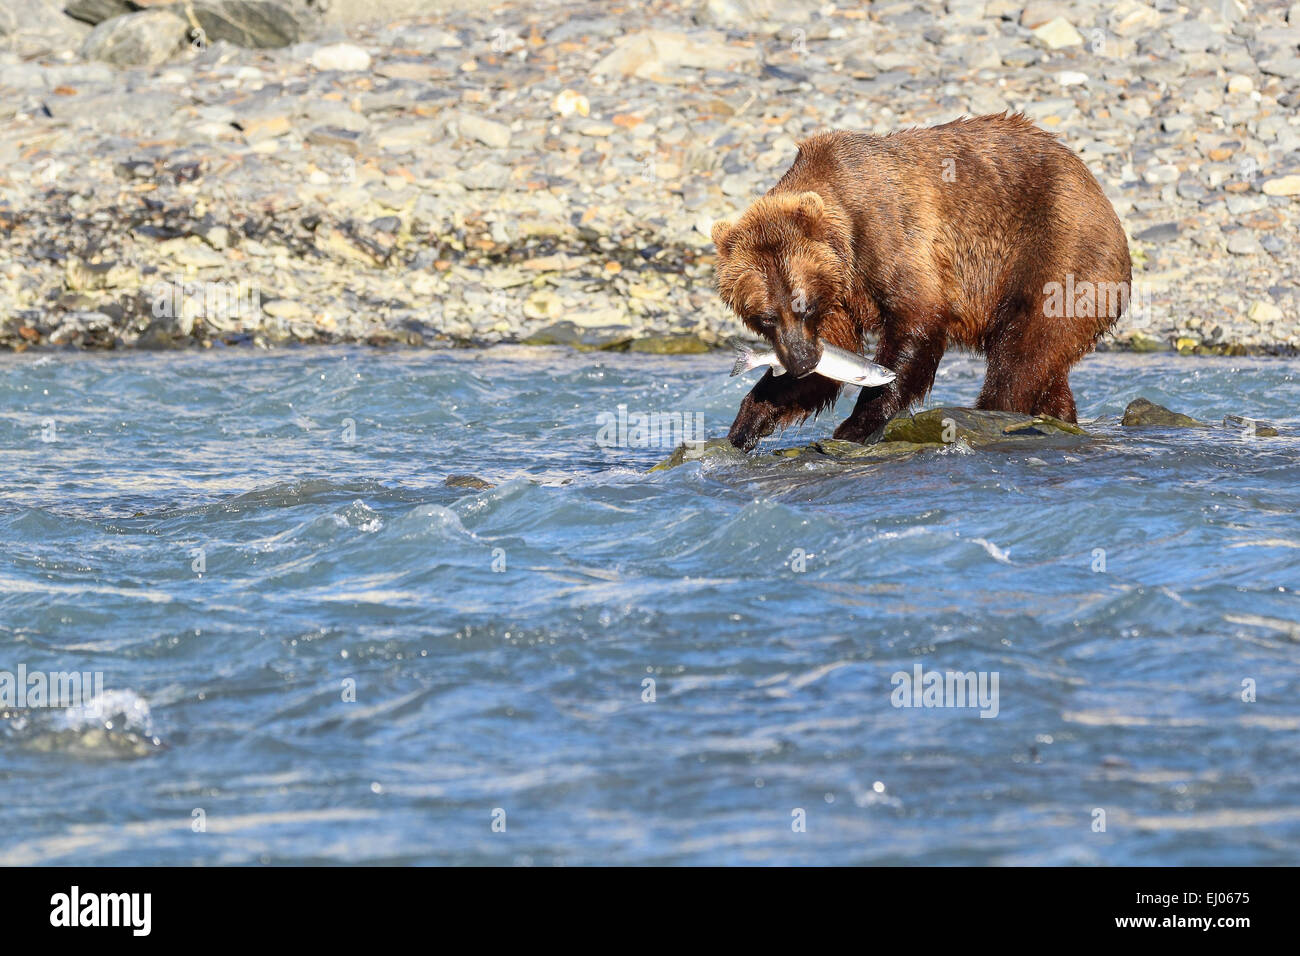 Grizzly bear fishing salmon at Dayville Road, Valdez, Alaska, United States of America. Stock Photo